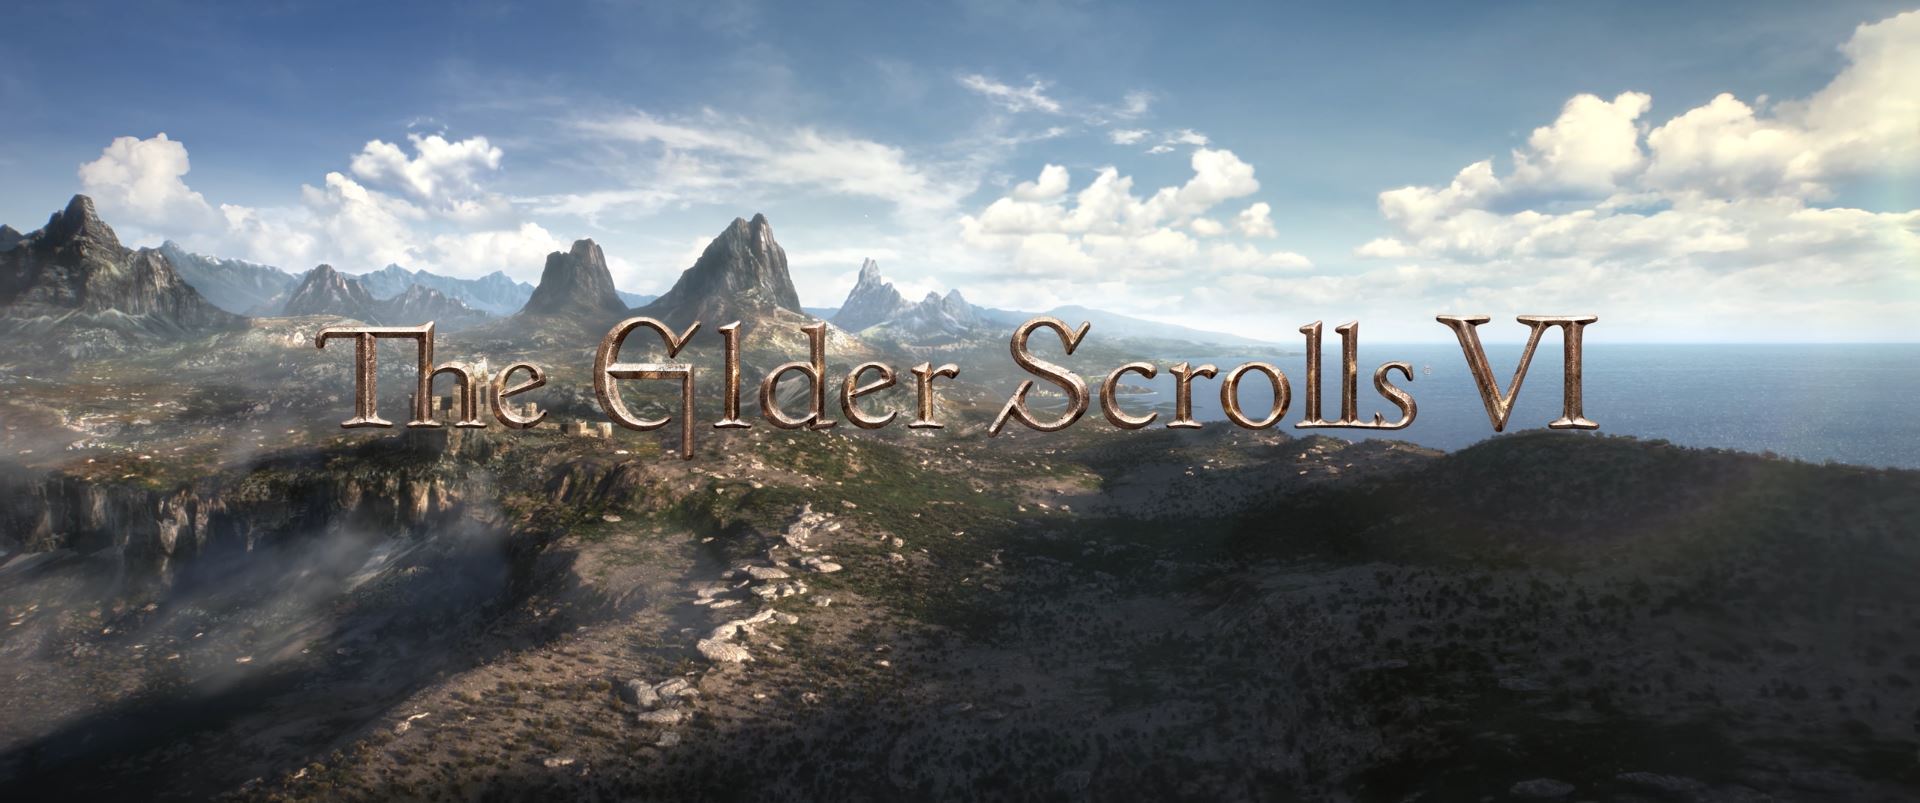 The Elder Scrolls VI, one of the games launching onto Xbox Game Pass on day one